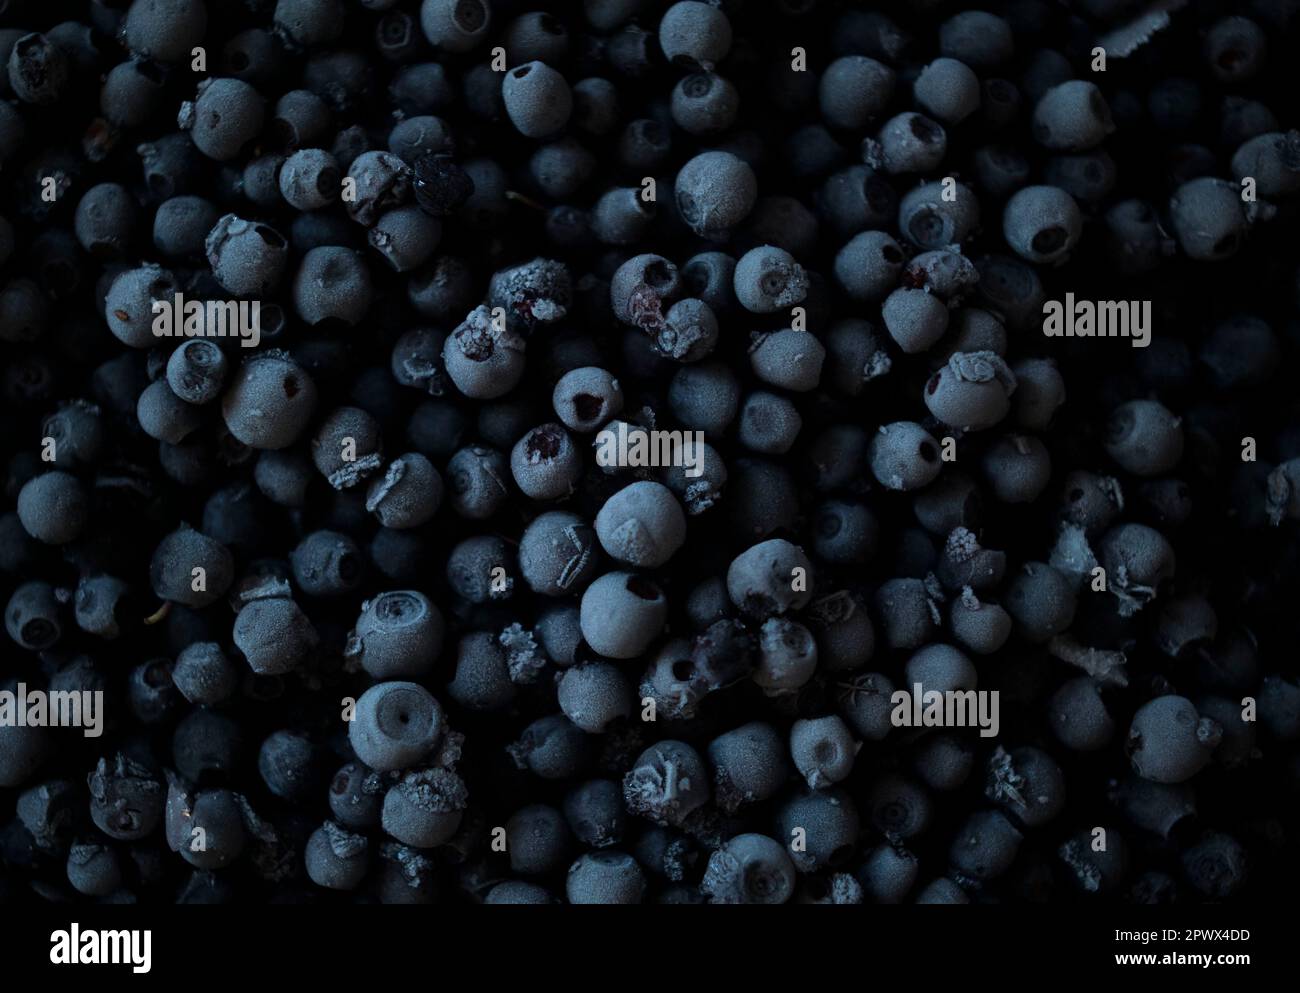 Frozen blueberries in dramatic light. Overhead view Stock Photo